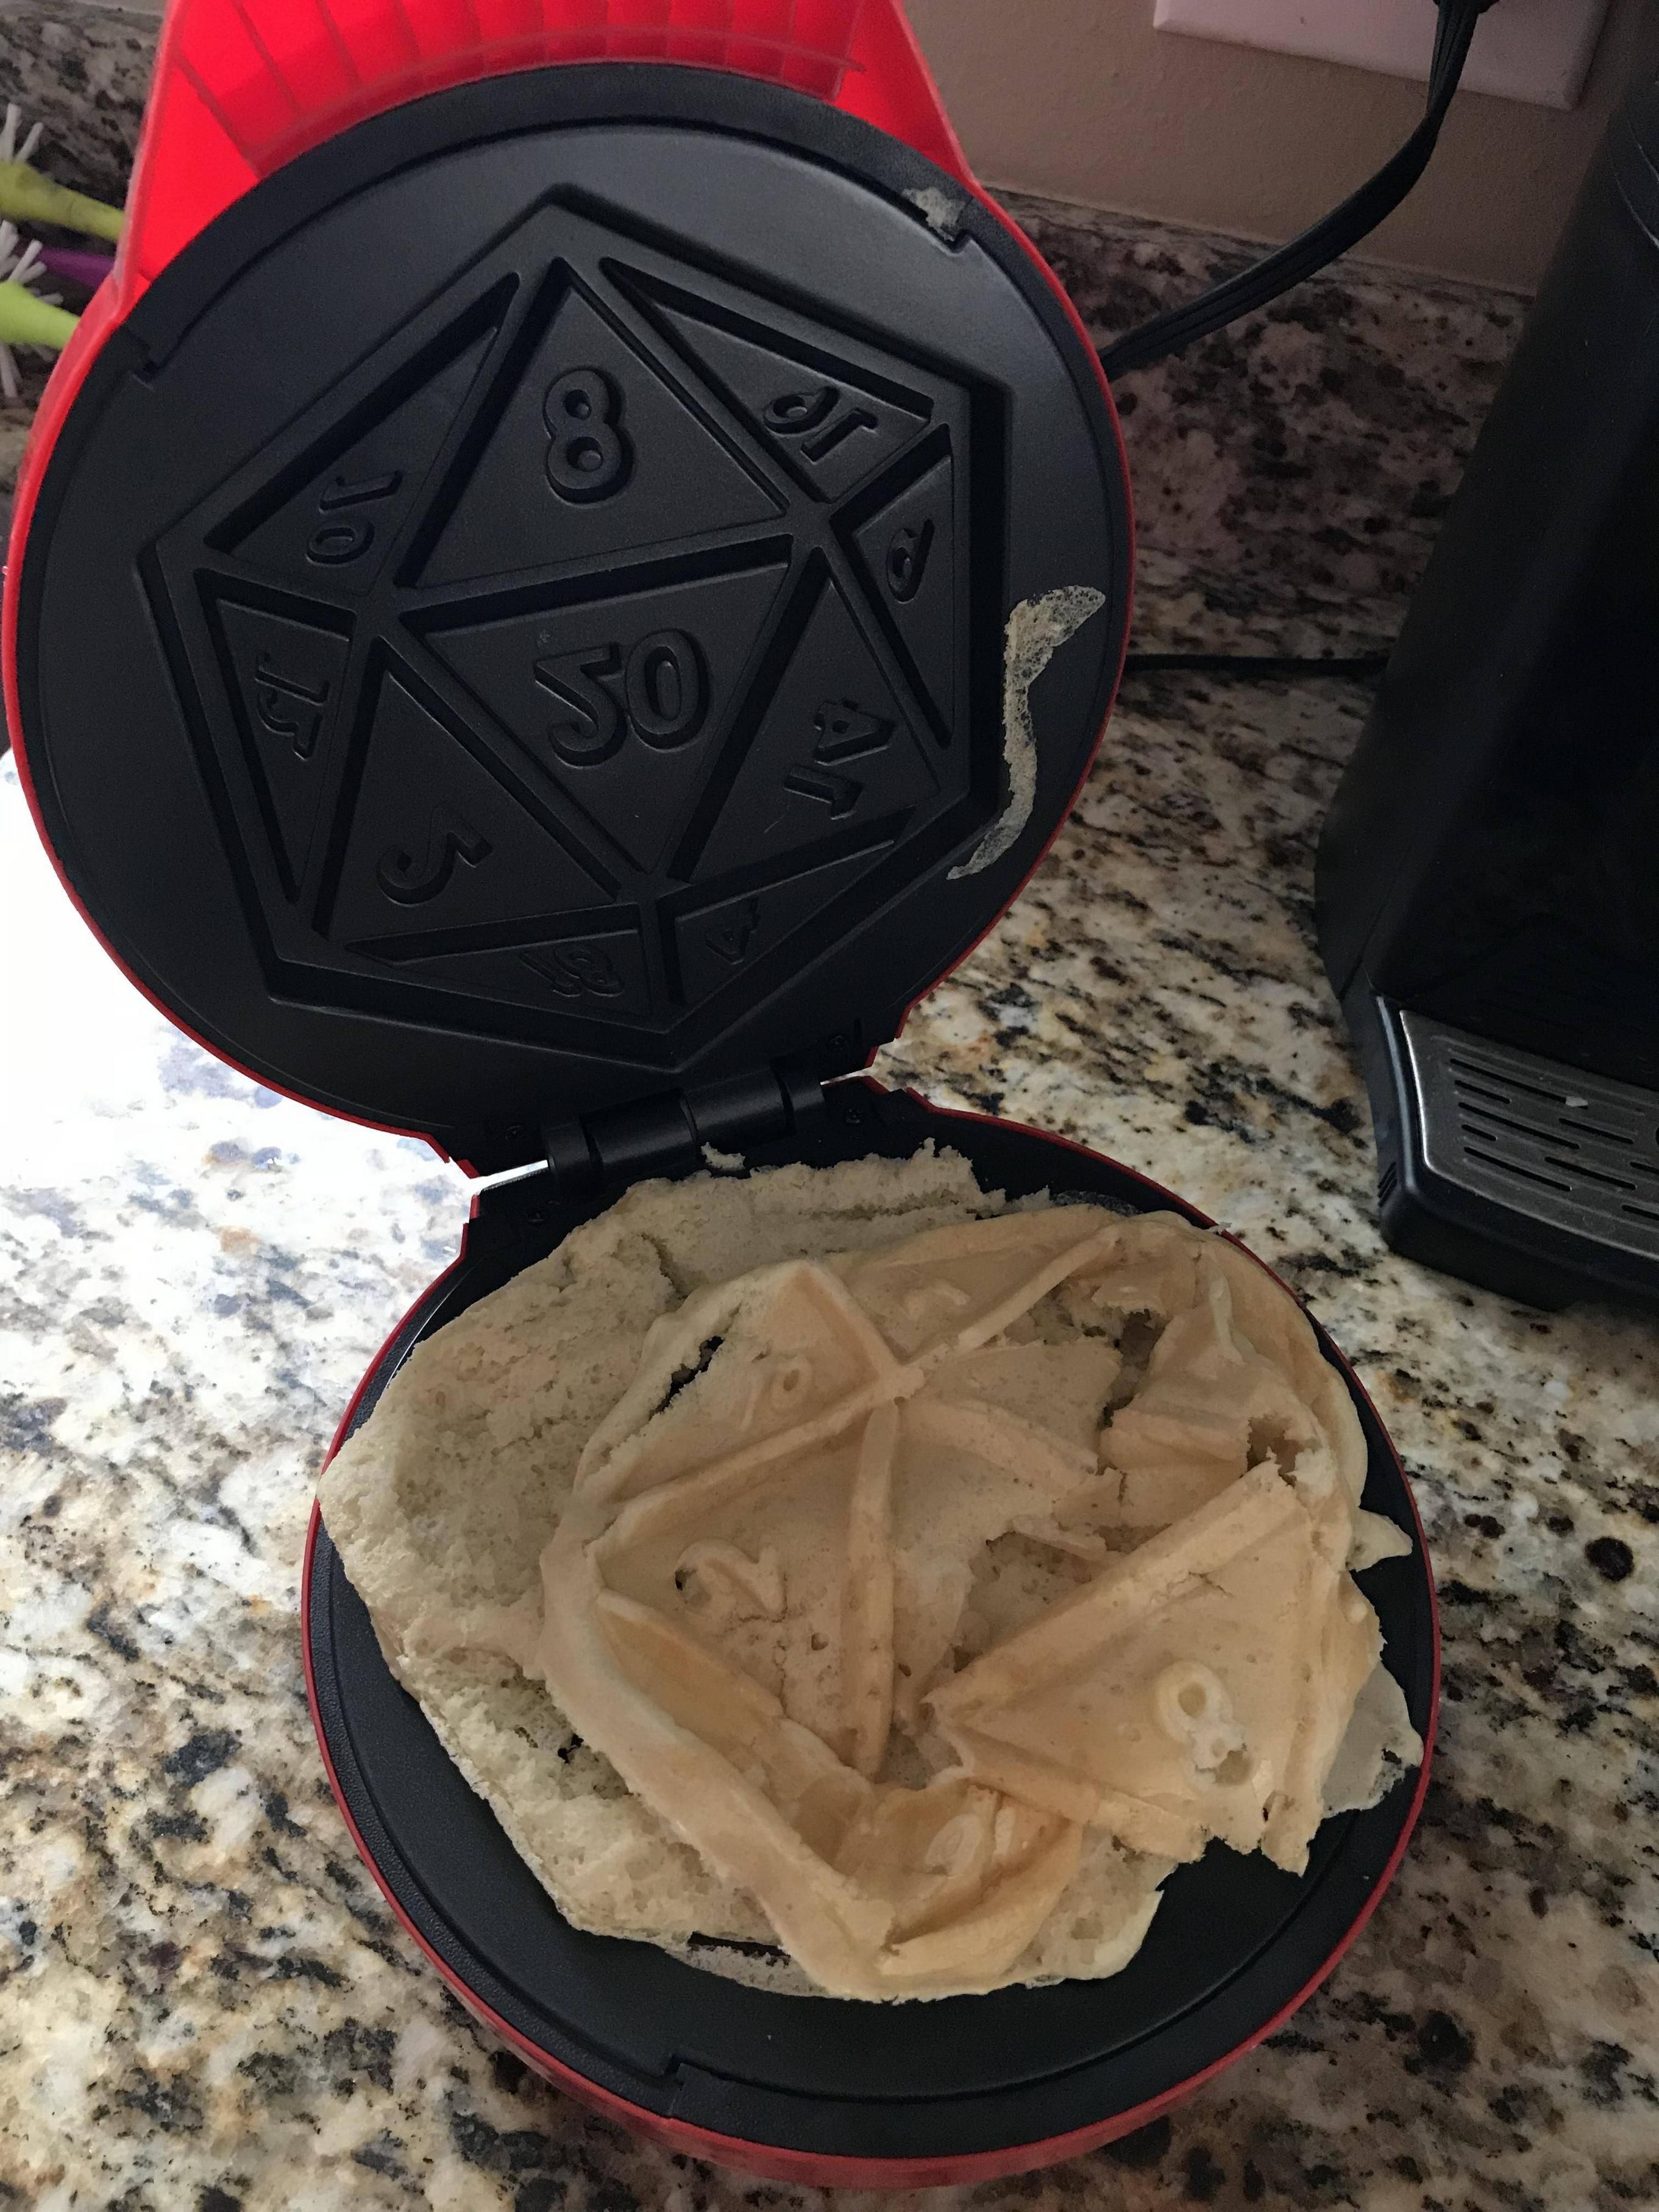 Bought a d20 waffle maker. Rolled a 1.